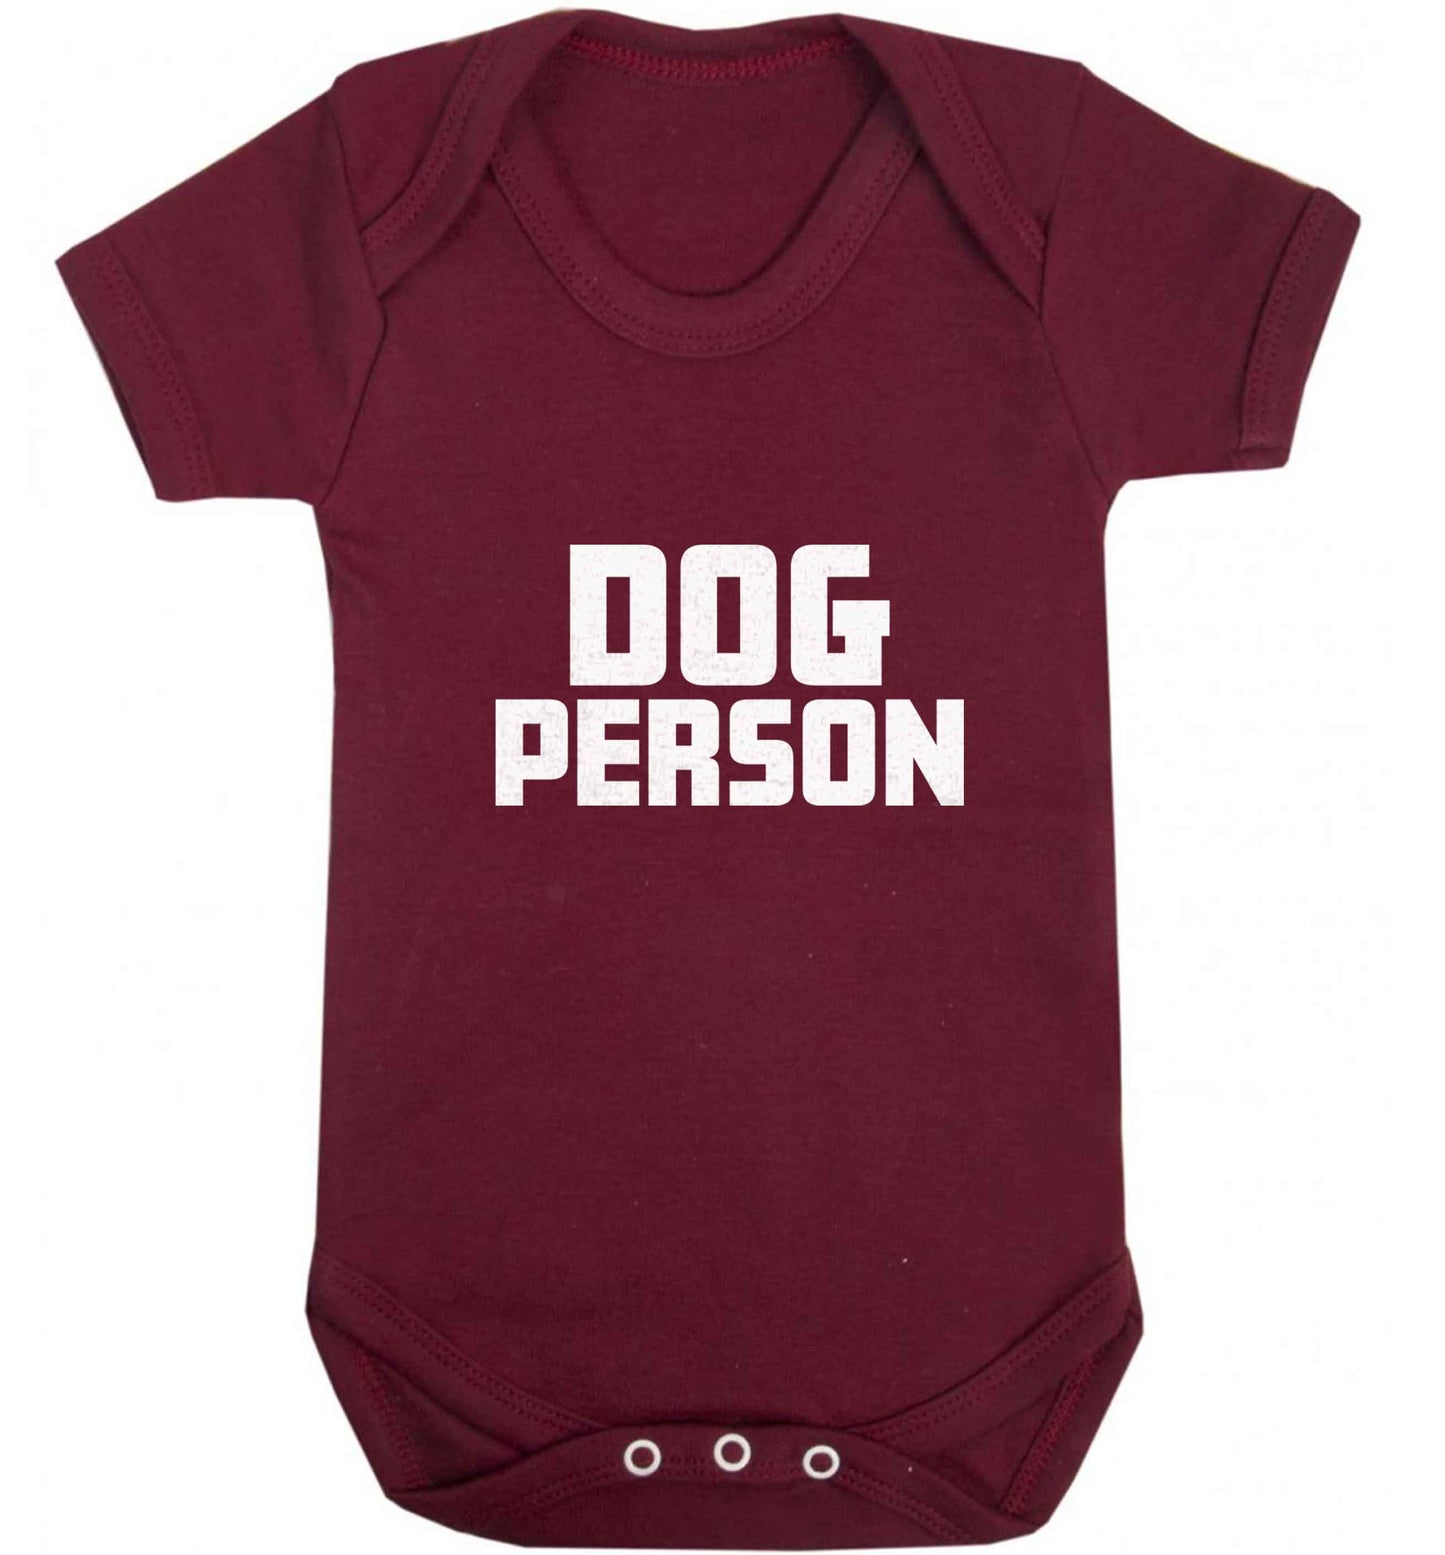 Dog Person Kit baby vest maroon 18-24 months